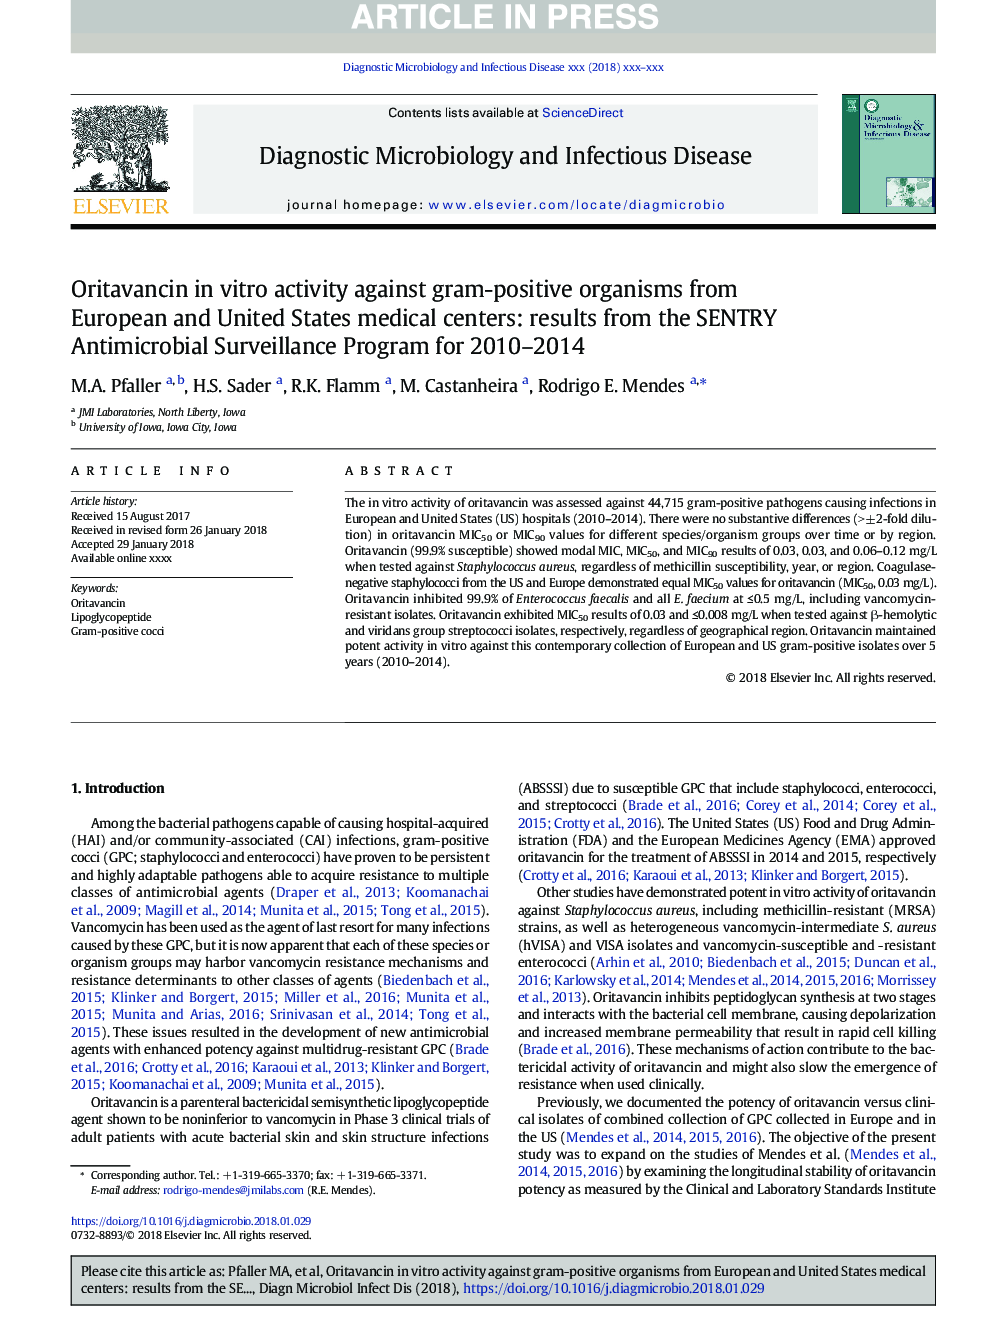 Oritavancin in vitro activity against gram-positive organisms from European and United States medical centers: results from the SENTRY Antimicrobial Surveillance Program for 2010-2014